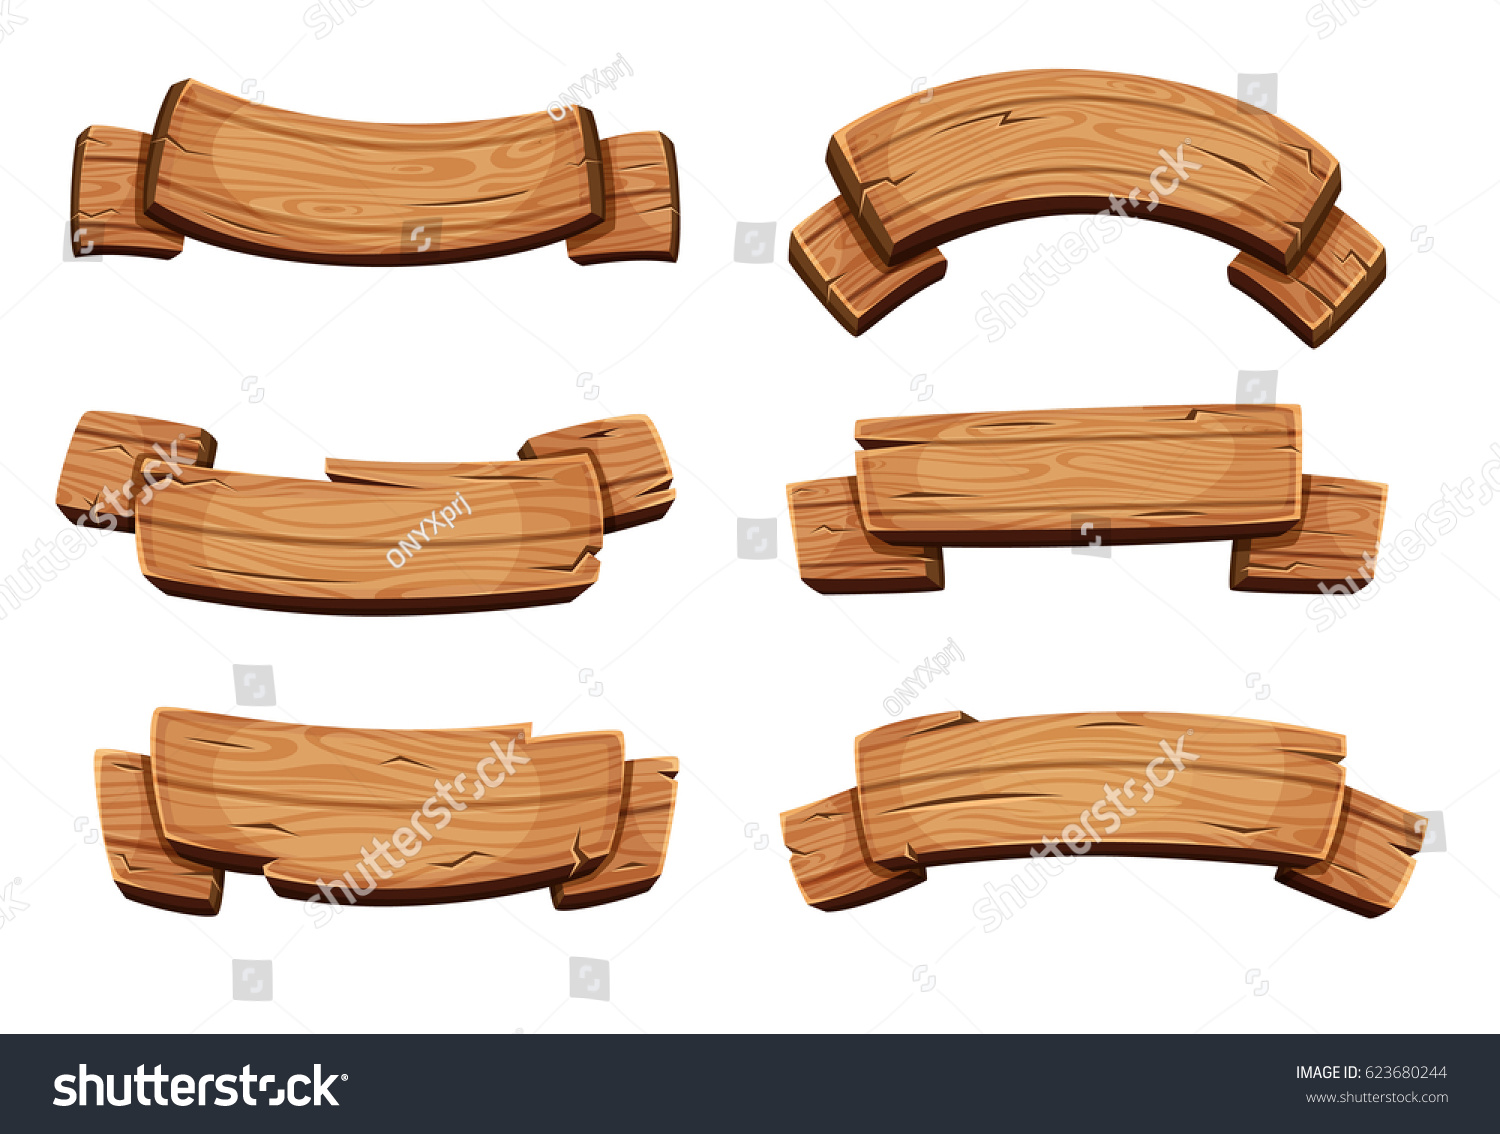 Cartoon brown wooden plate and ribbons. Vector set isolate on white background. Wooden ribbons collection, illustration of wood board